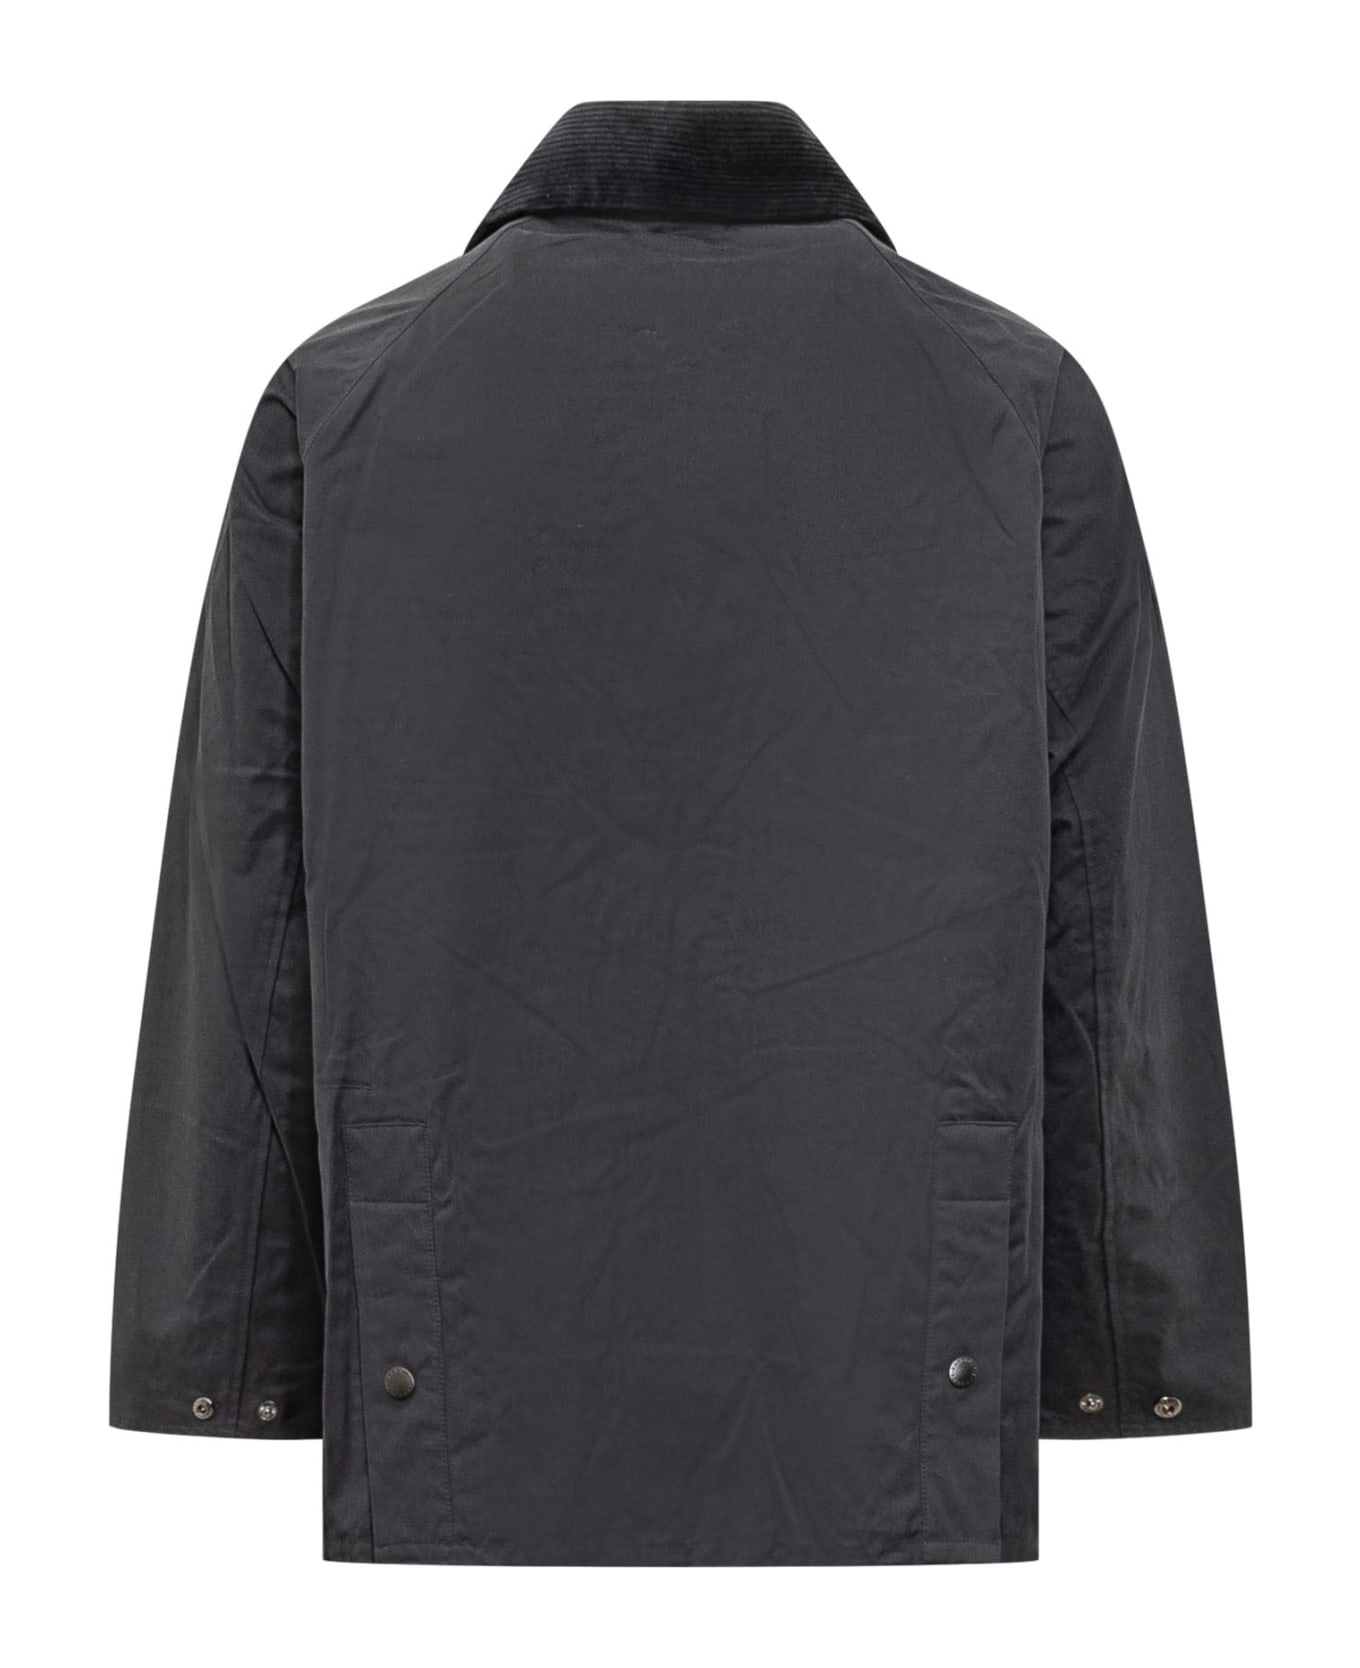 Barbour Peached Jacket - NAVY